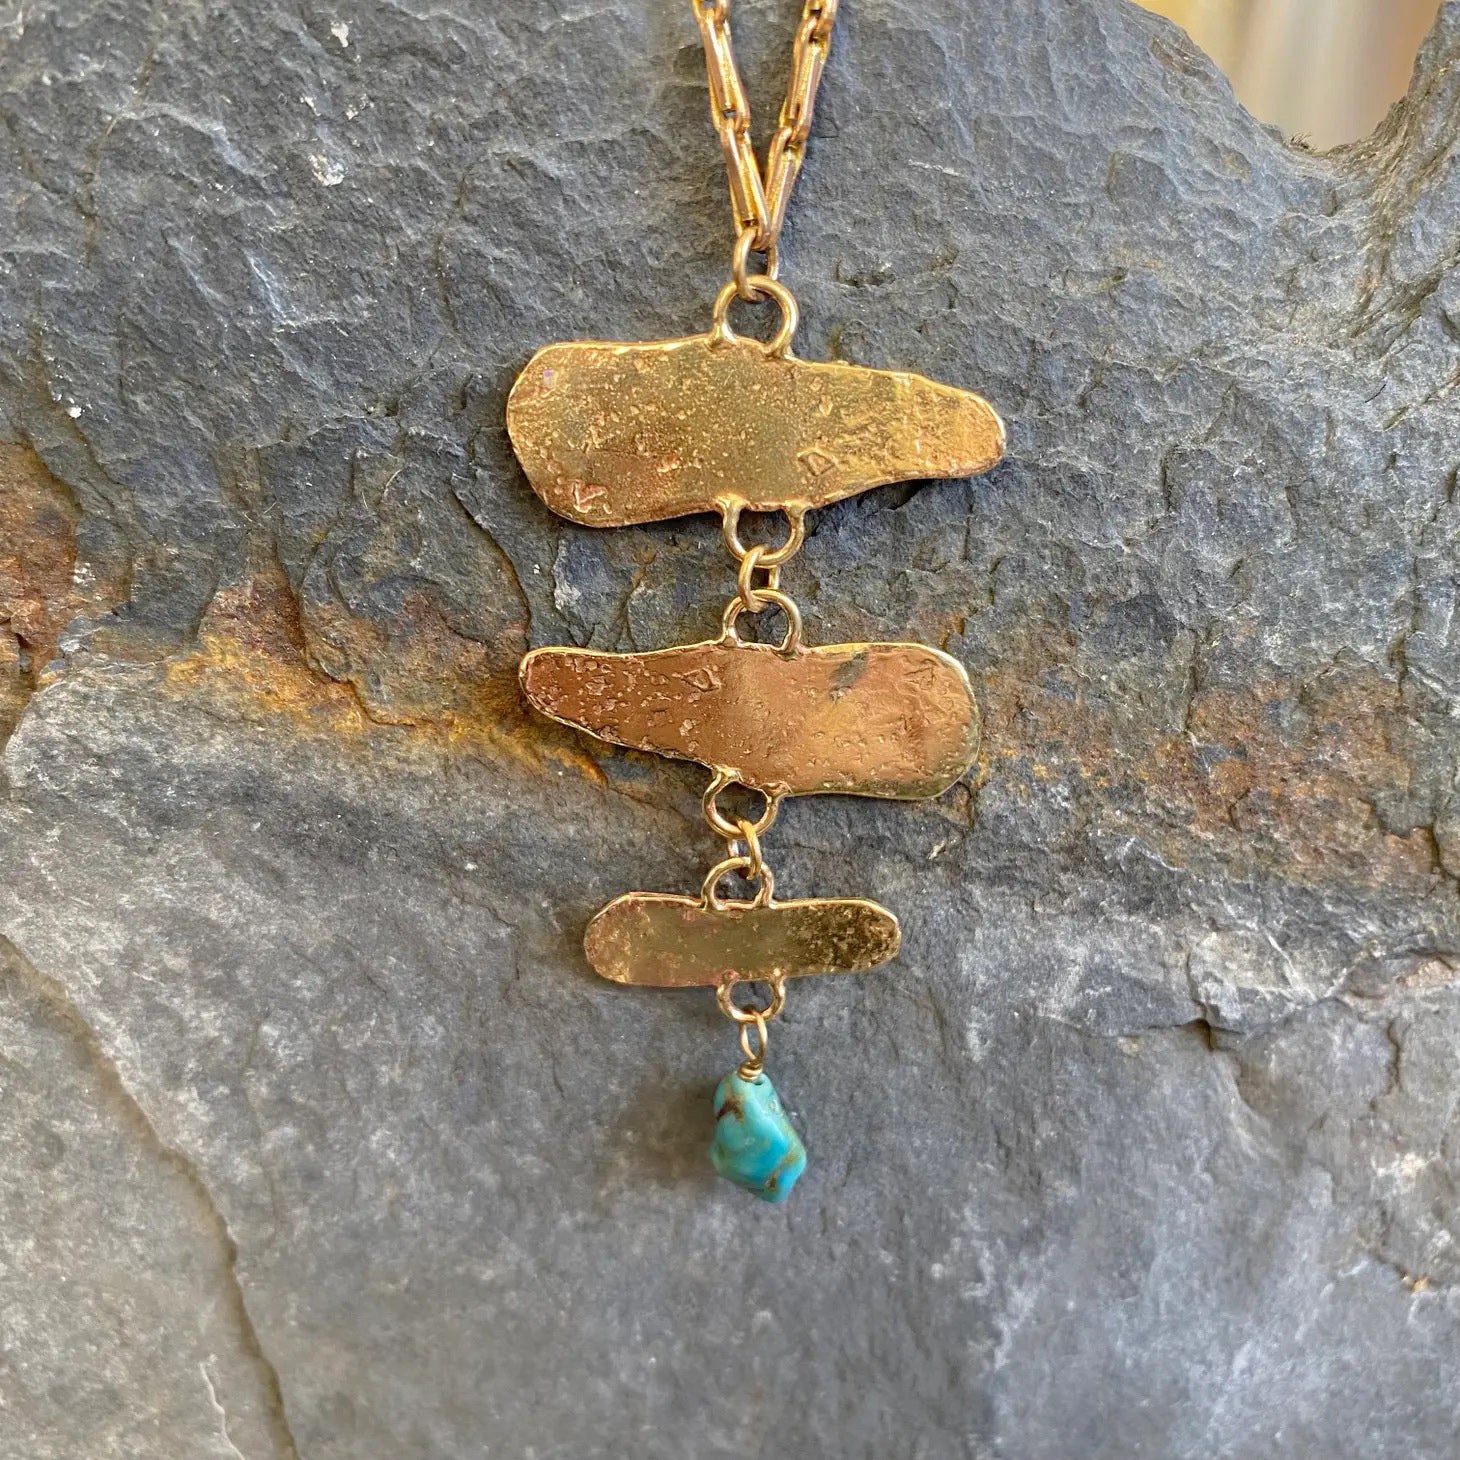 Turquoise + Brass 'Fern' Pendant Necklace